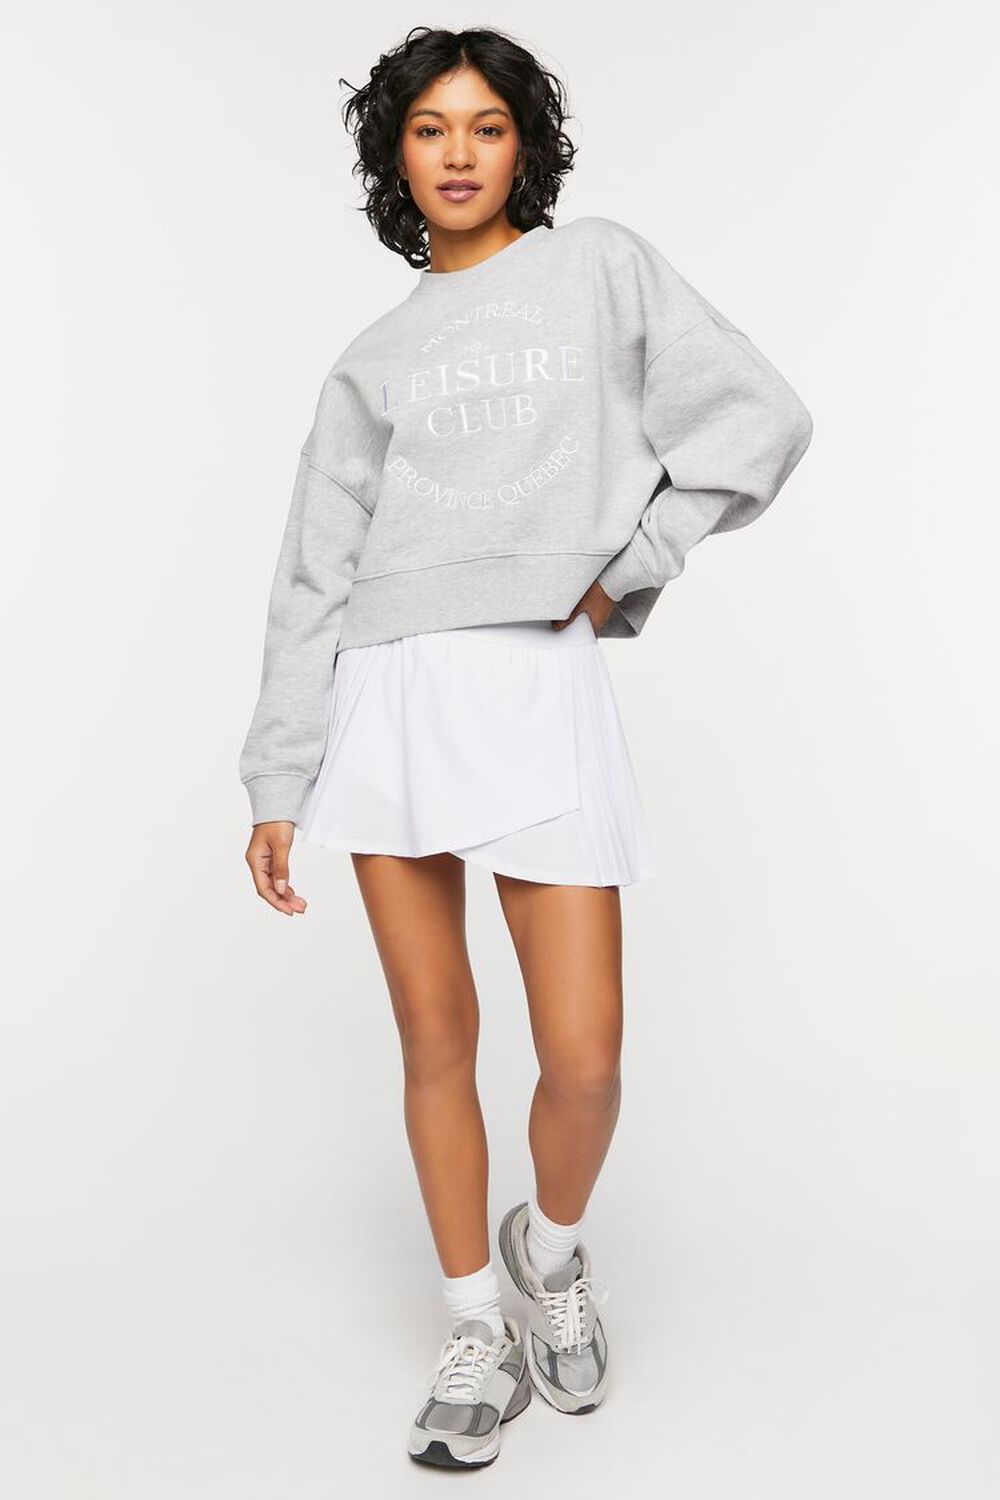 Montreal Leisure Club Embroidered Pullover